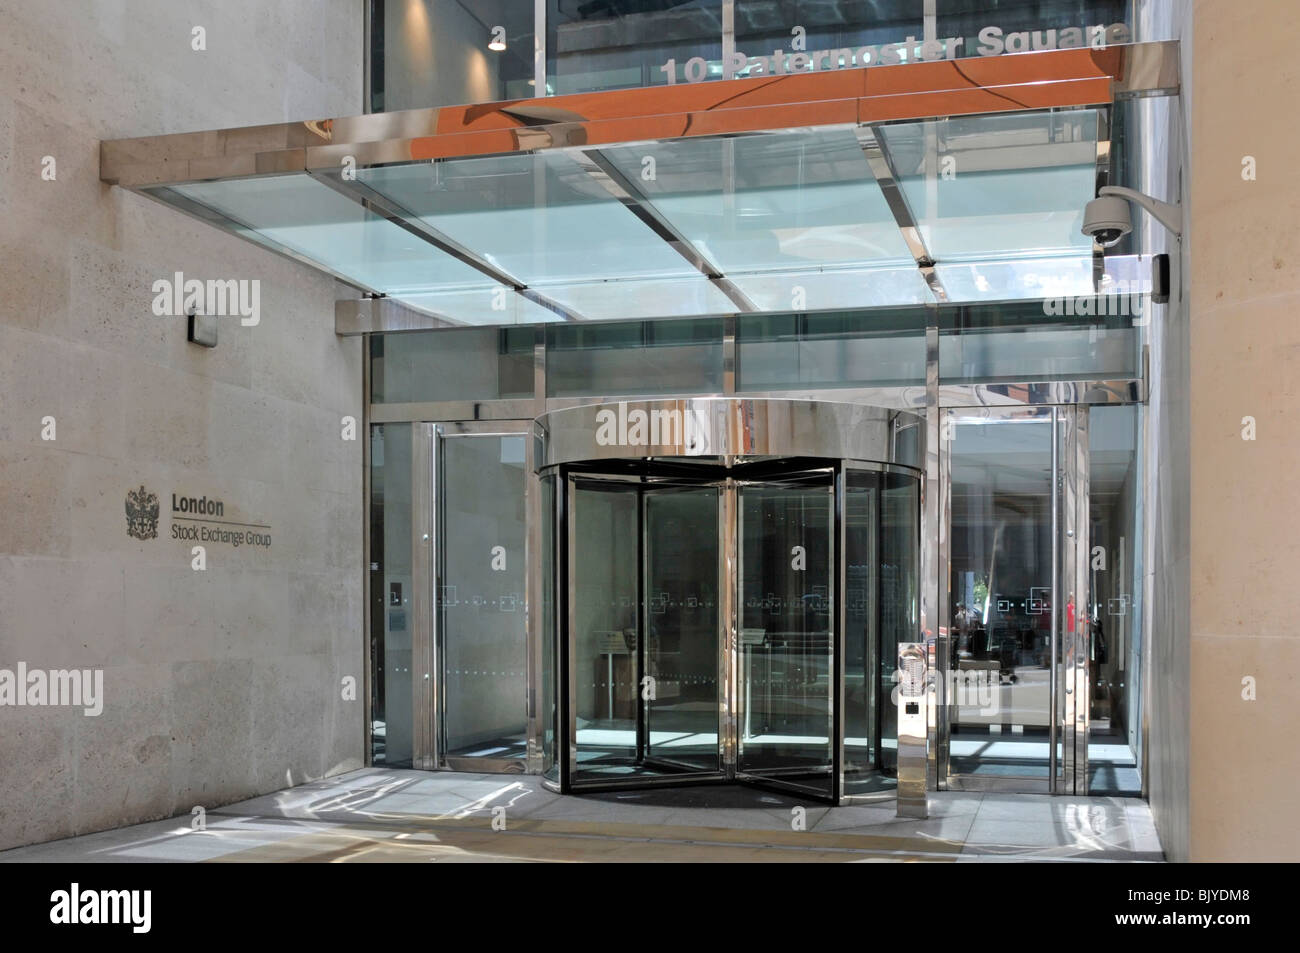 Glazed canopy above revolving door entrance to the London Stock Exchange at 10 Paternoster Square in financial district of City Of London England UK Stock Photo